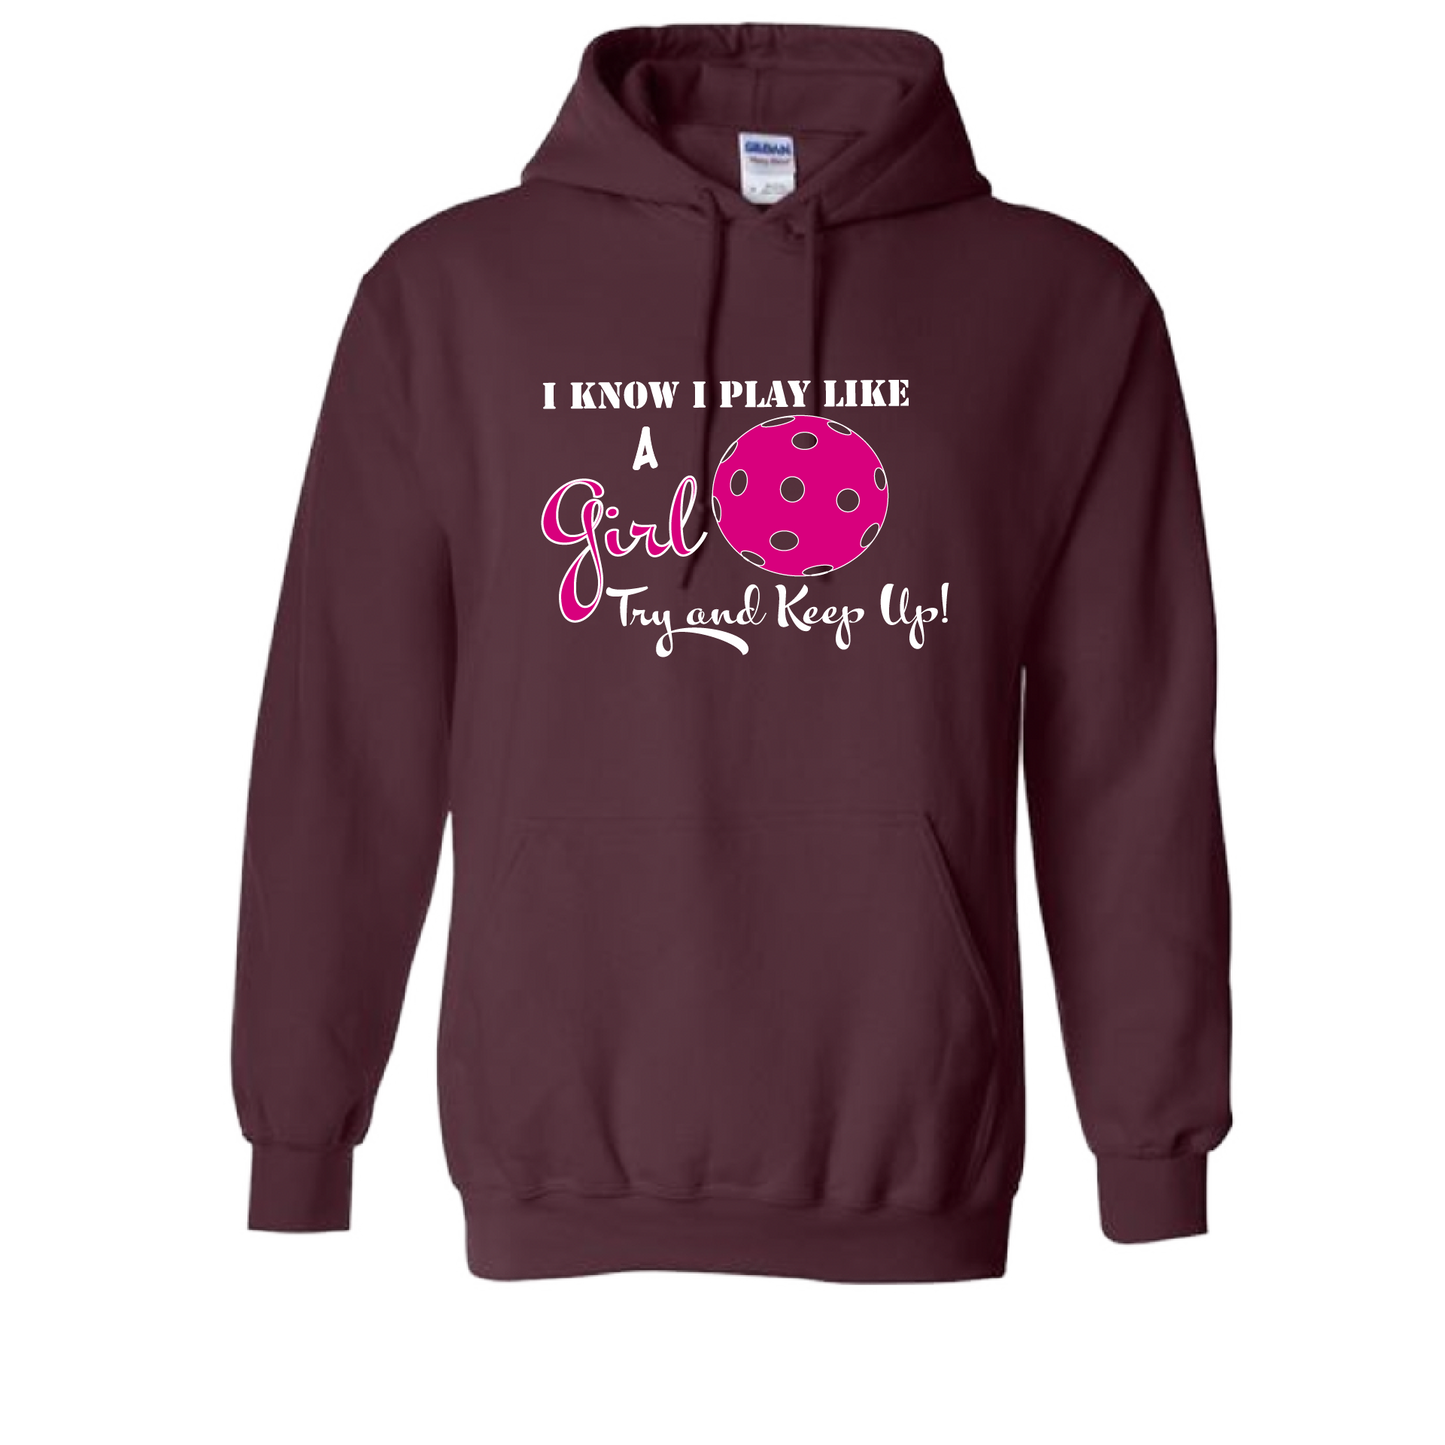 Pickleball Design: I know I Play Like a Girl, Try to Keep Upl  Unisex Hooded Sweatshirt:  Moisture-wicking, double-lined hood, front pouch pocket.  This unisex hooded sweatshirt is ultra comfortable and soft. Stay warm on the Pickleball courts while being that hit with this one of kind design.